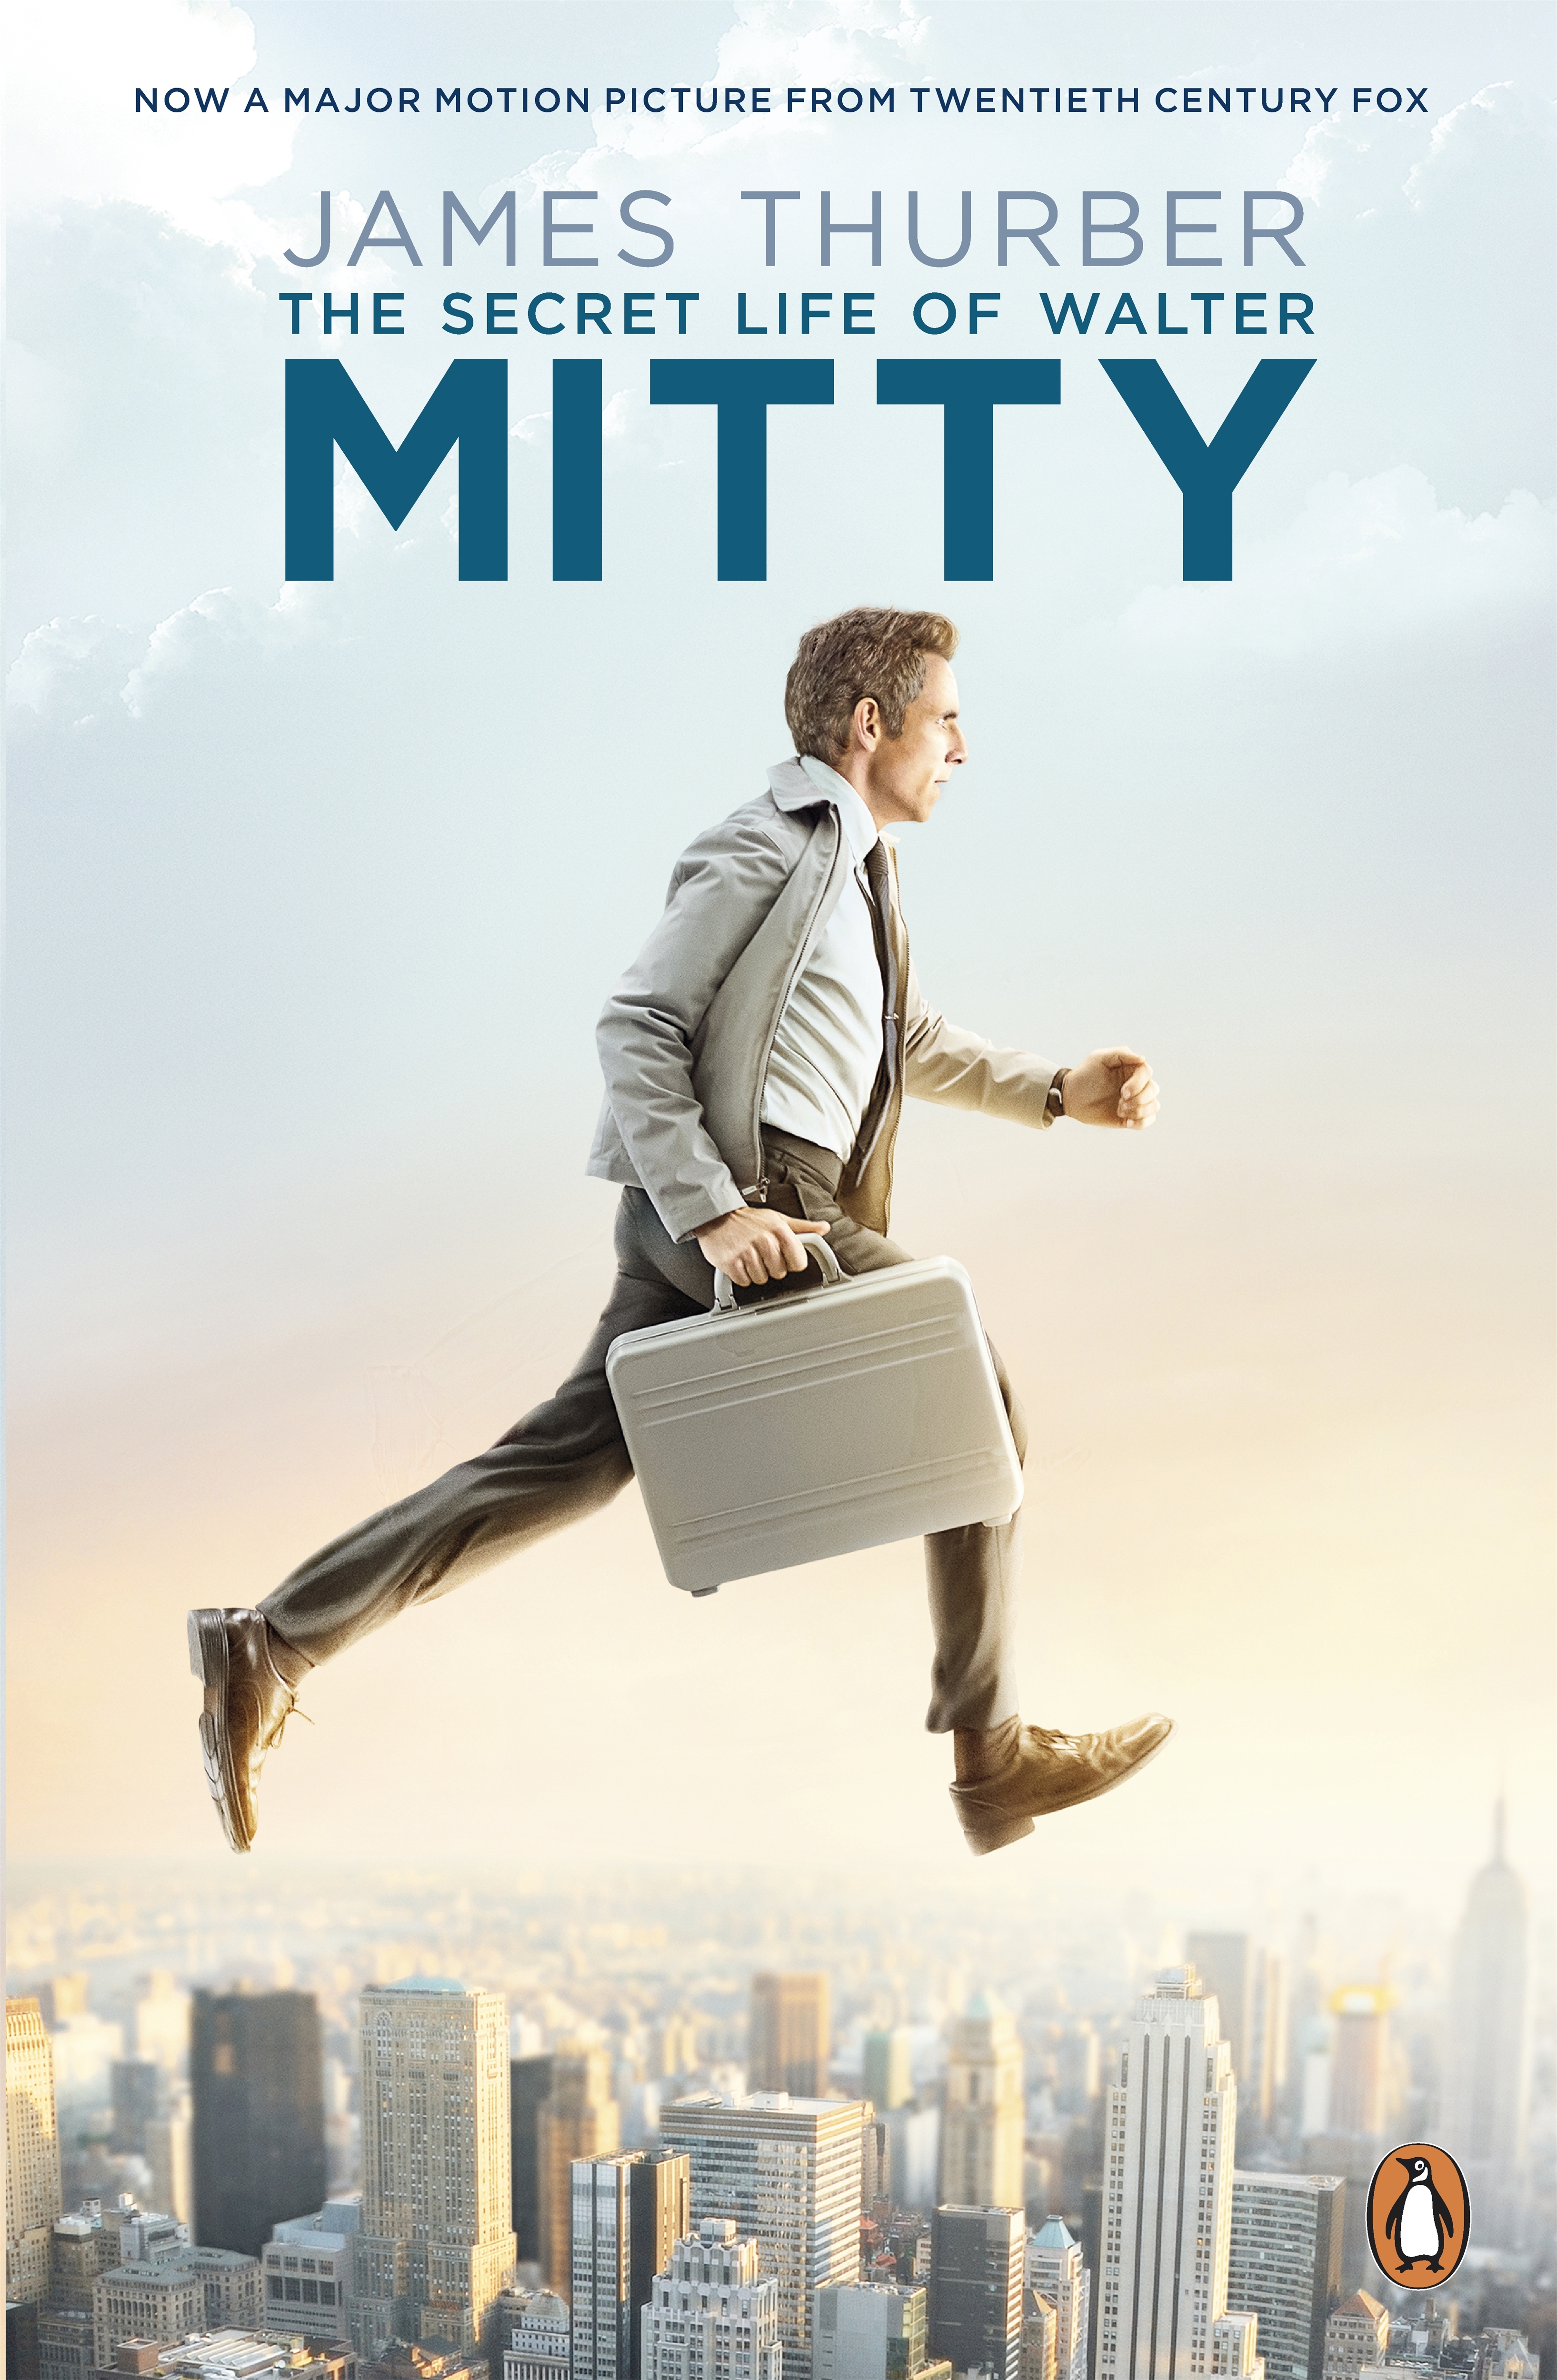 the secret life of walter mitty james thurber book buy